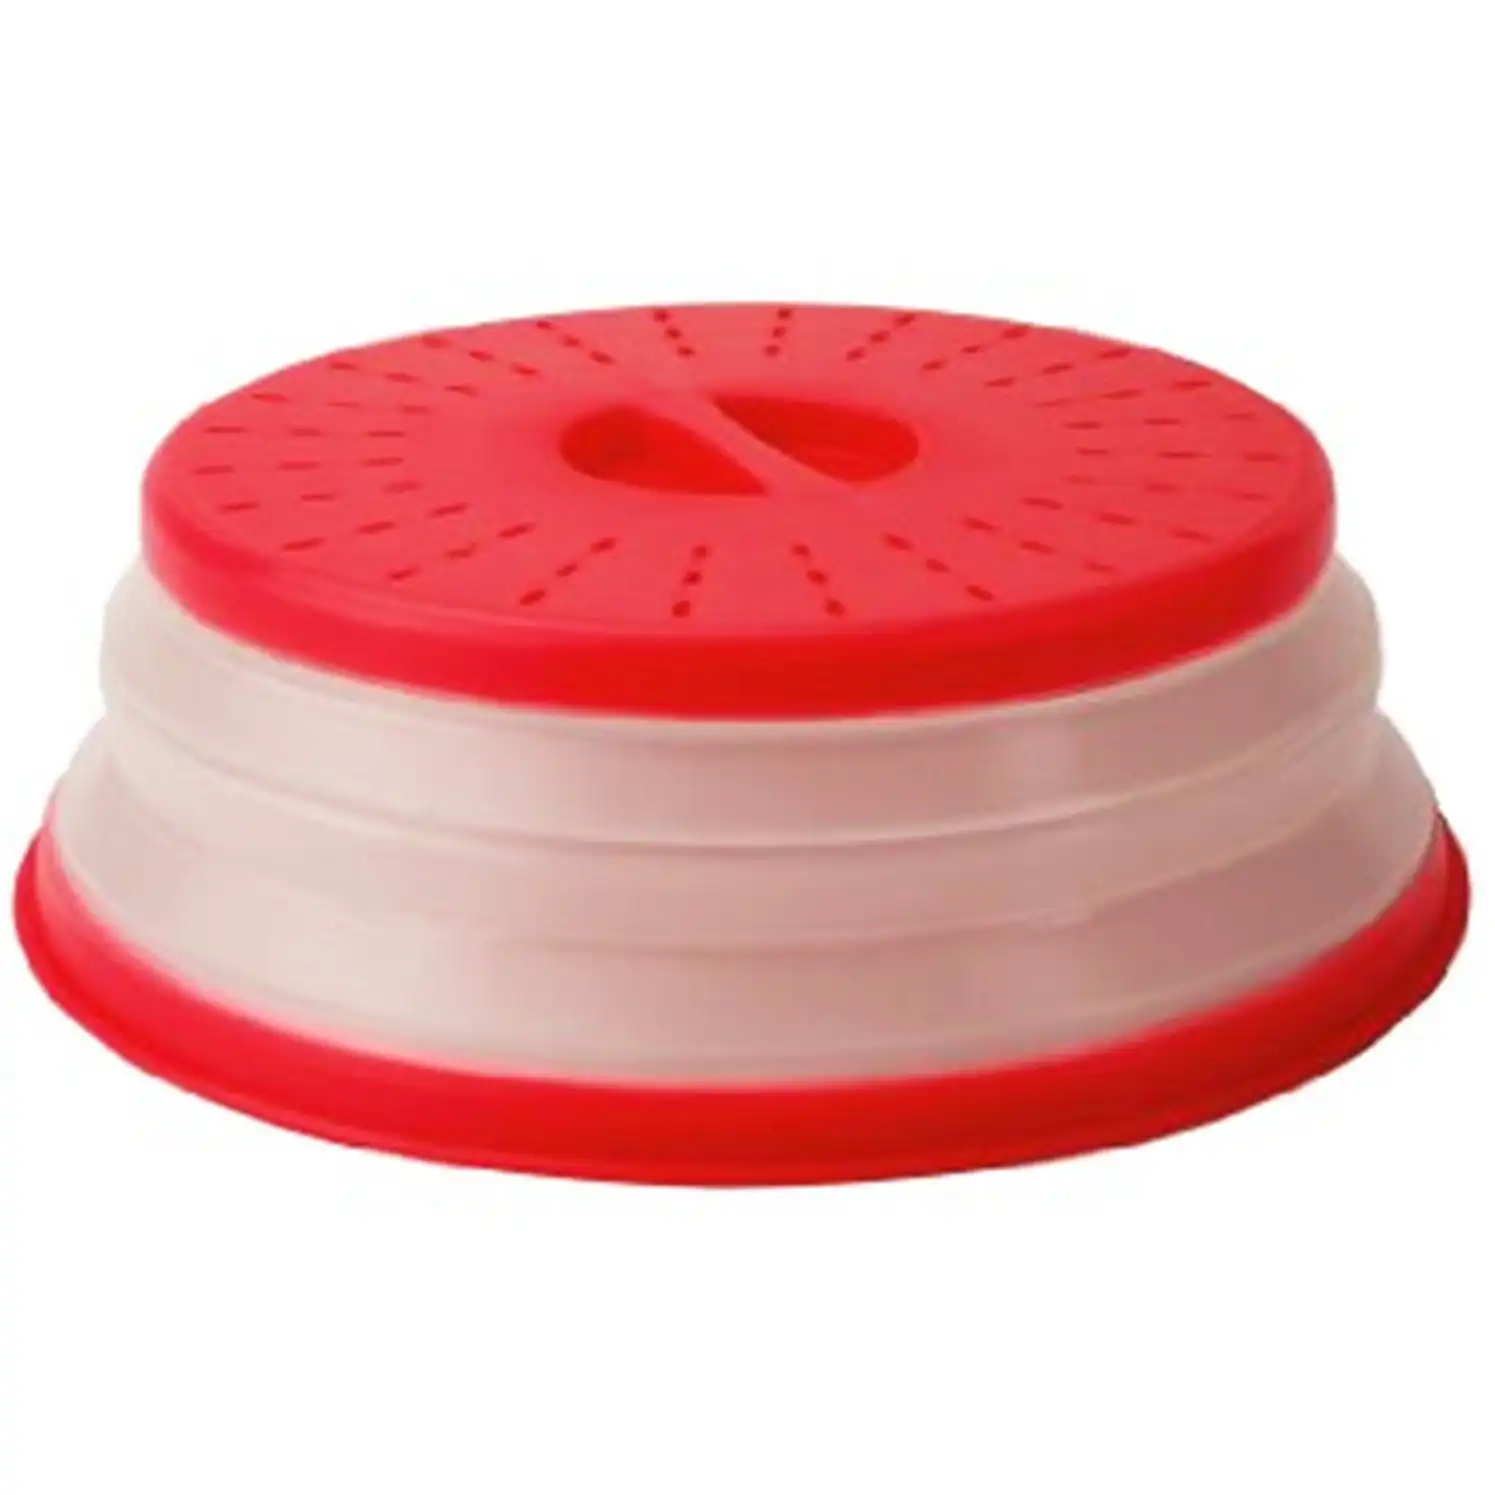 Tovolo Red Microwave Food Cover